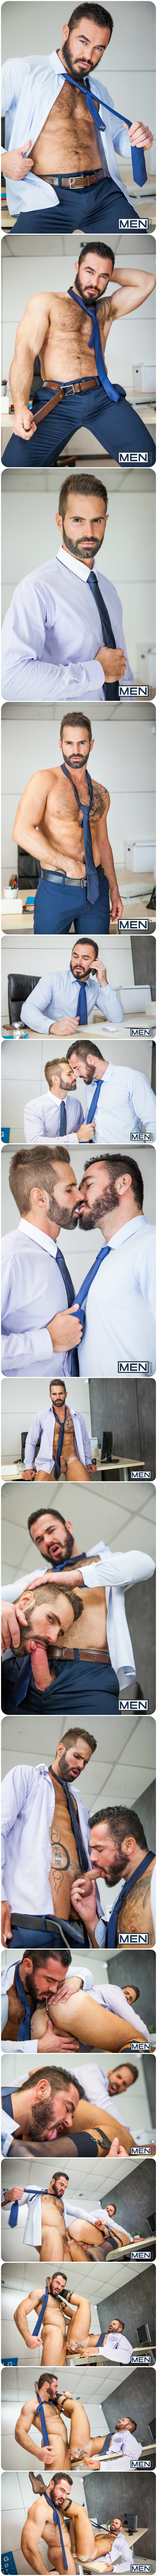 The Gay Office, Dani Robles, Jessy Ares